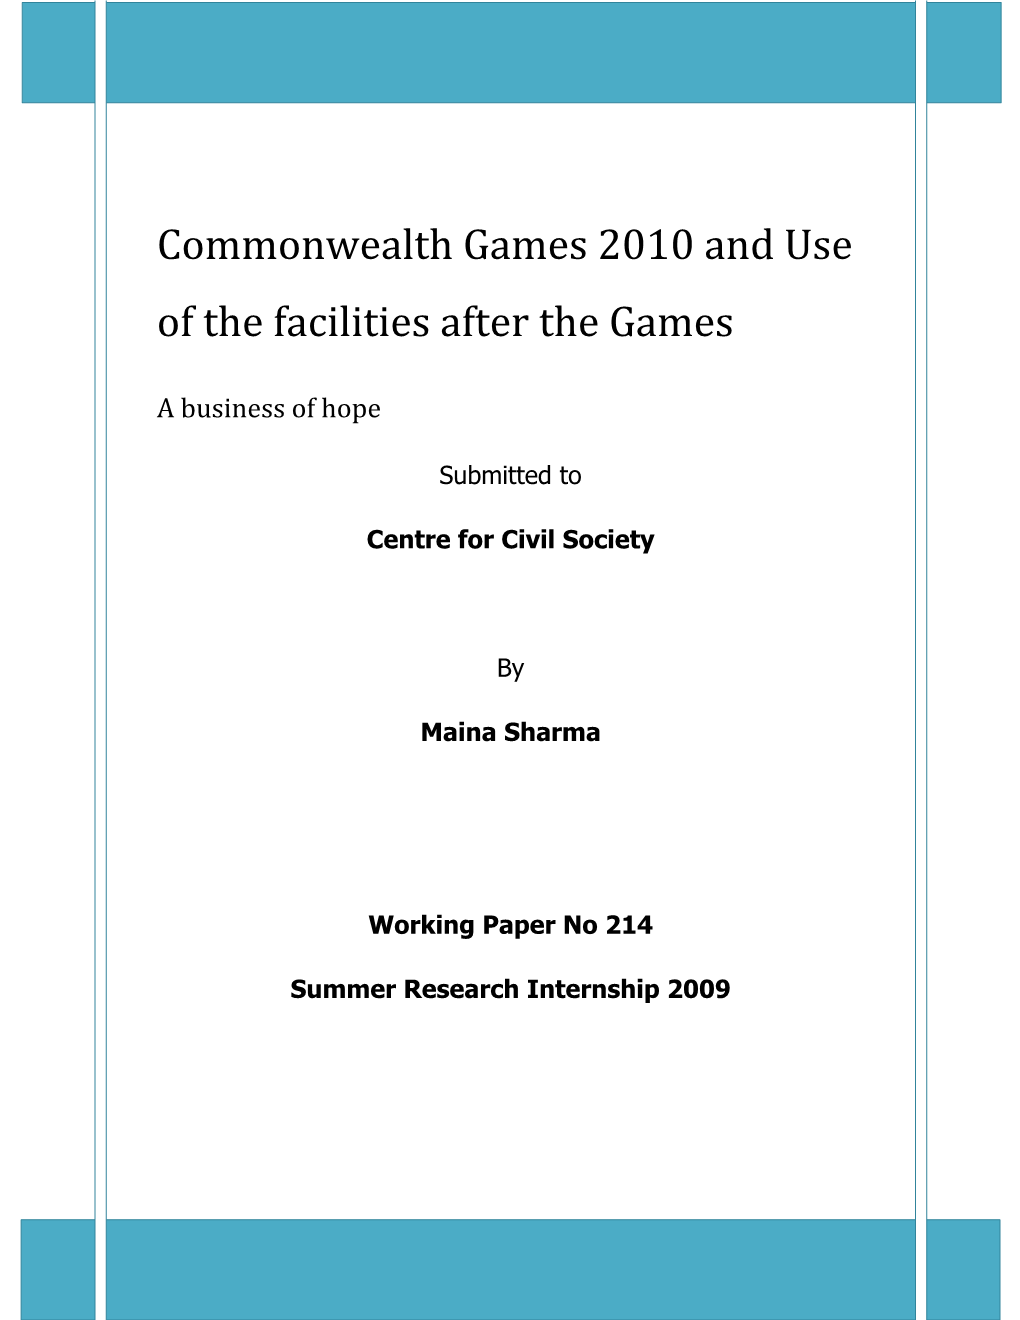 Commonwealth Games 2010 and Use of the Facilities After the Games